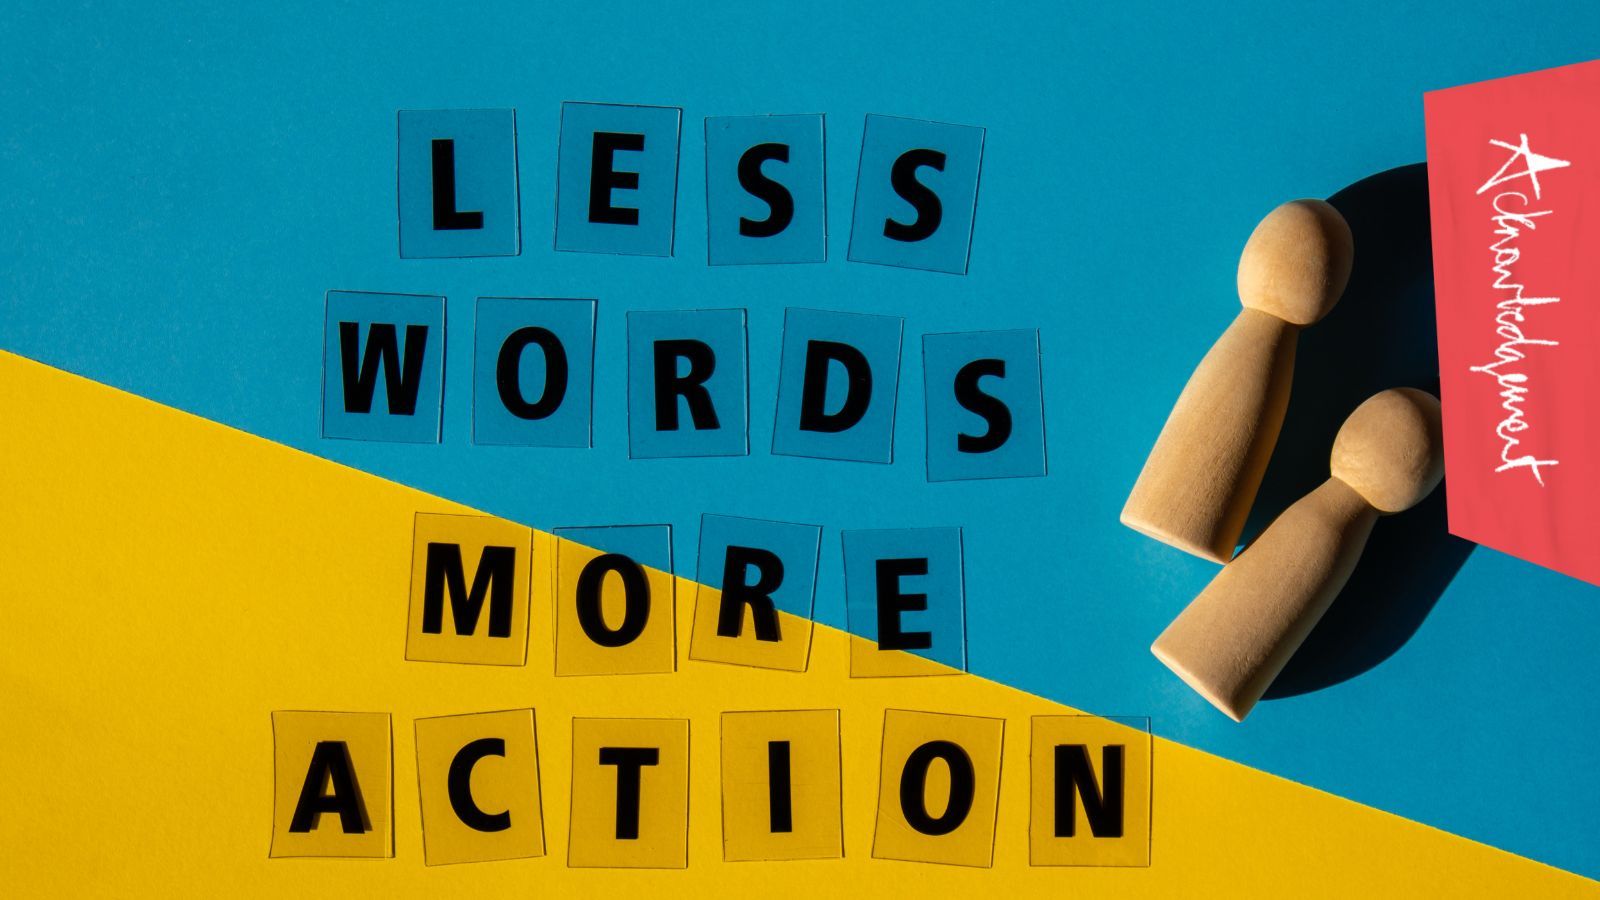 "Less words more action" title graphic